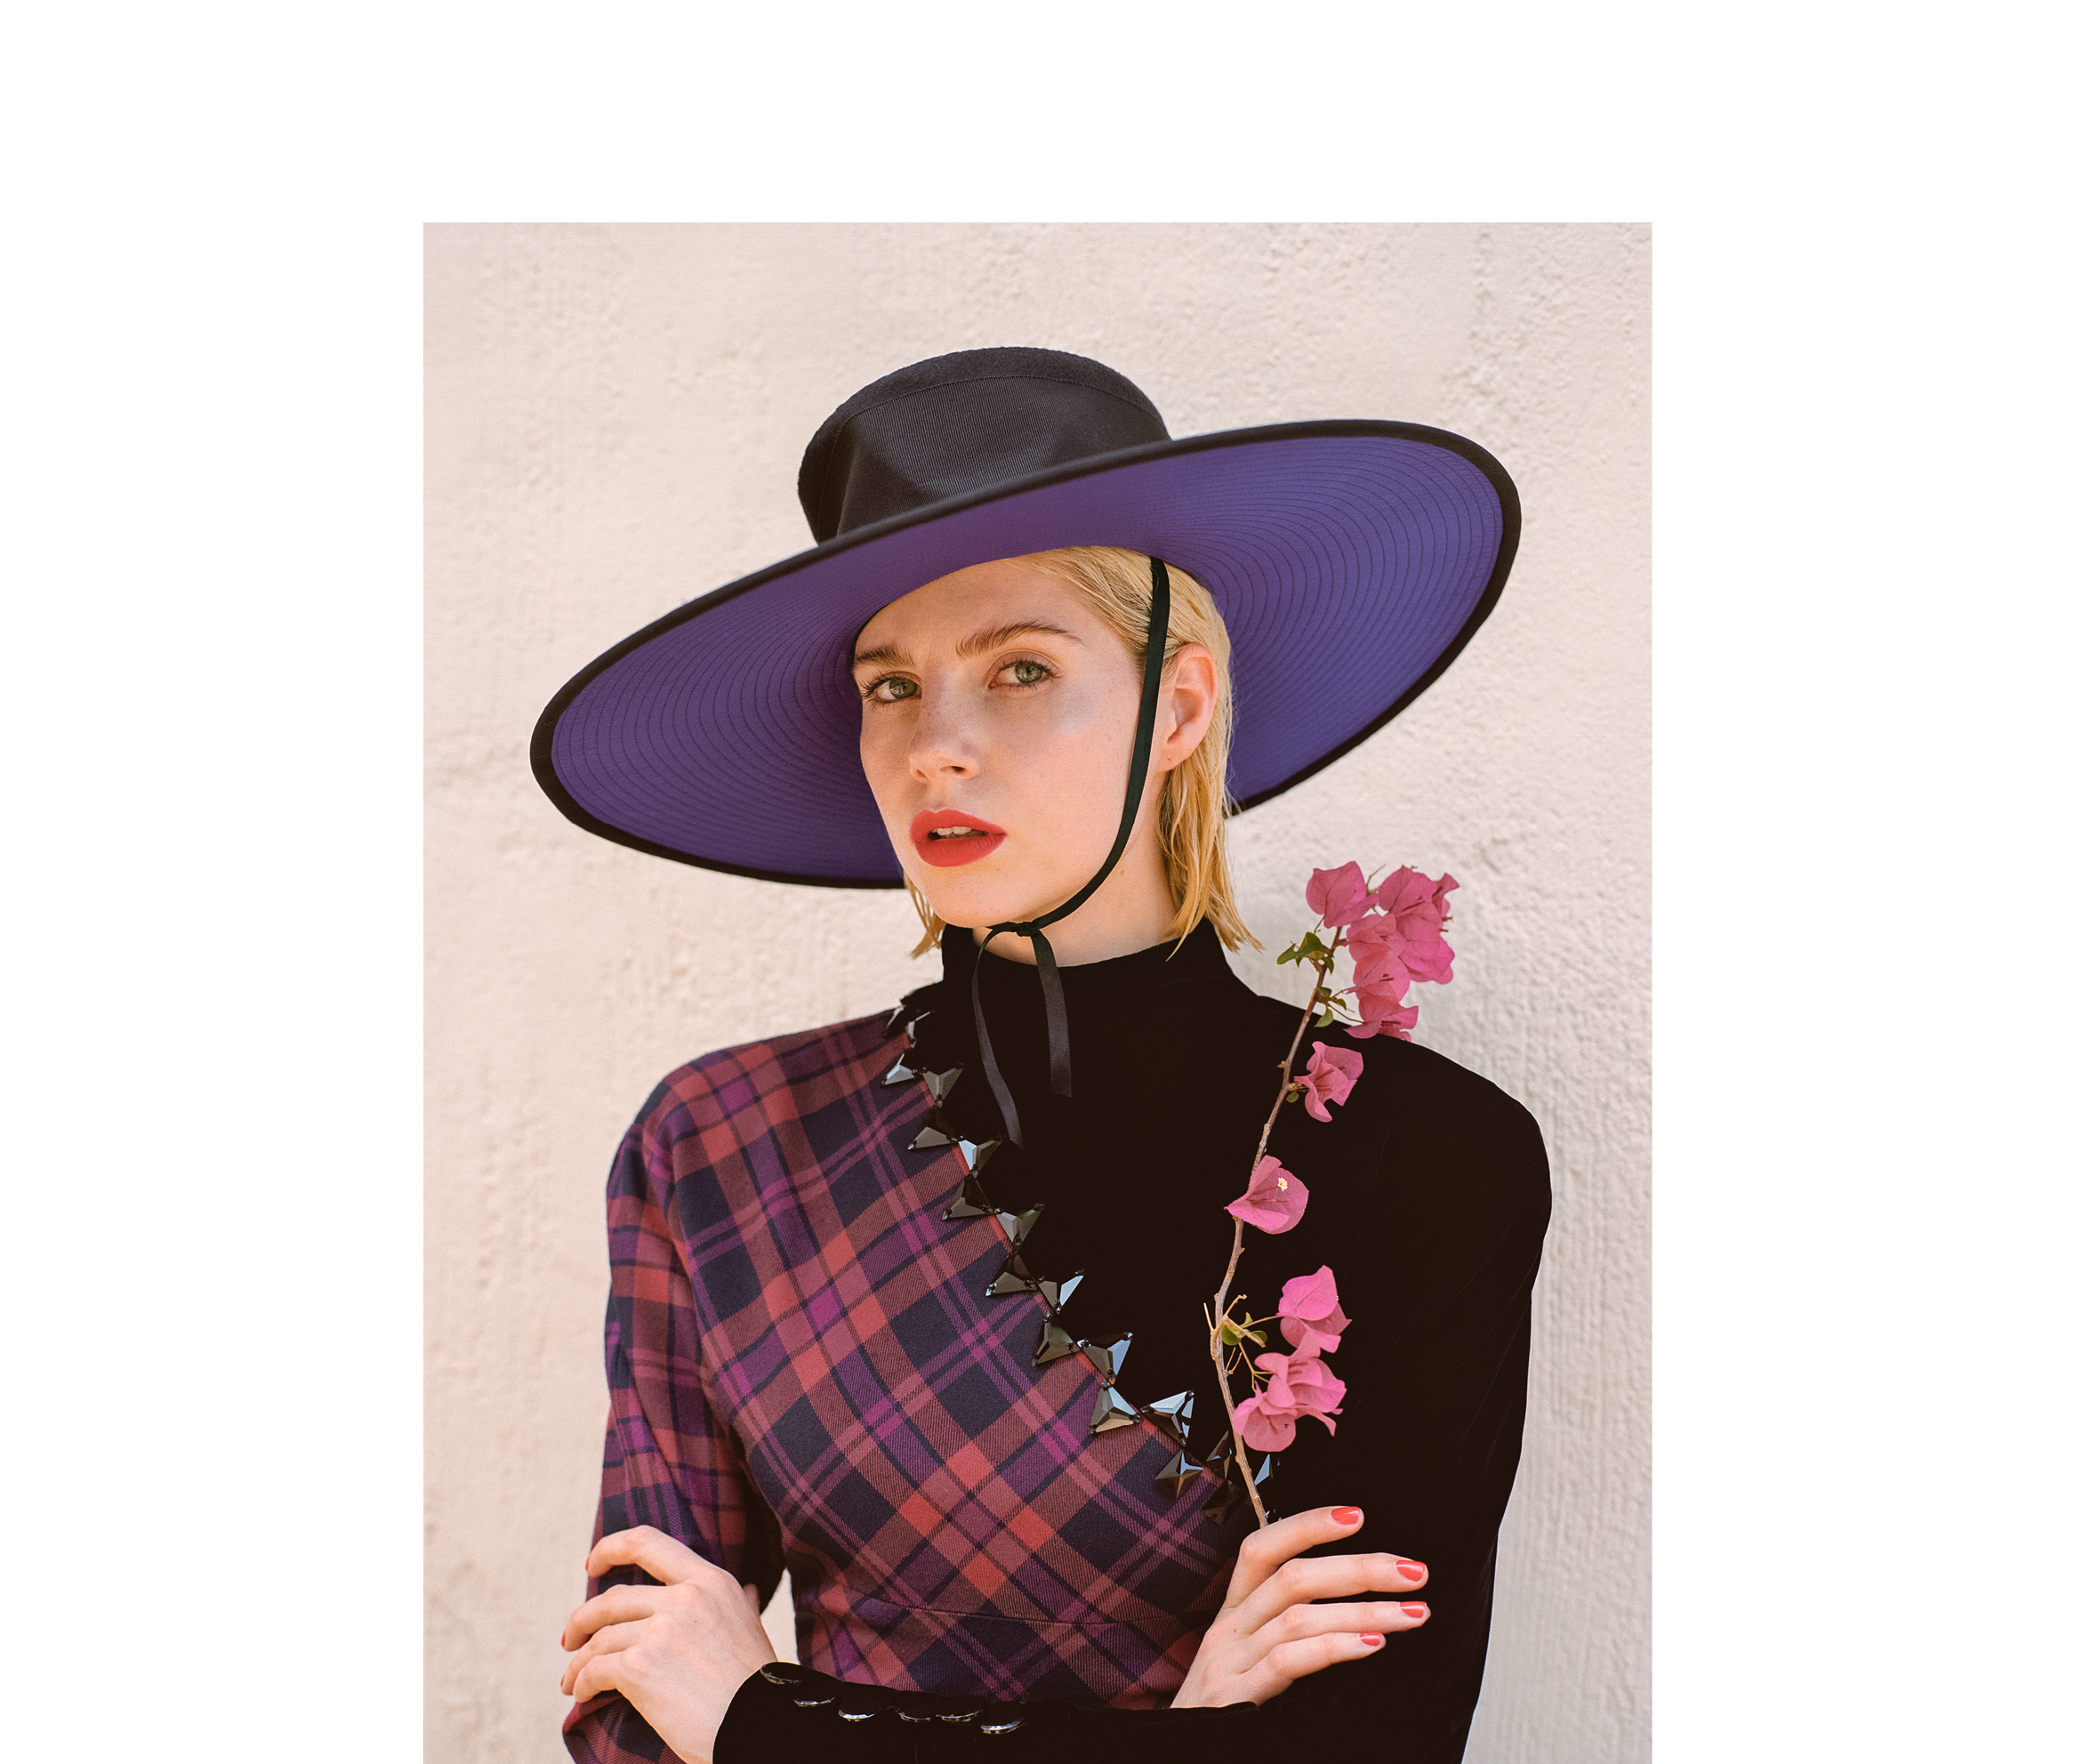 All clothing and hat by Marc Jacobs.